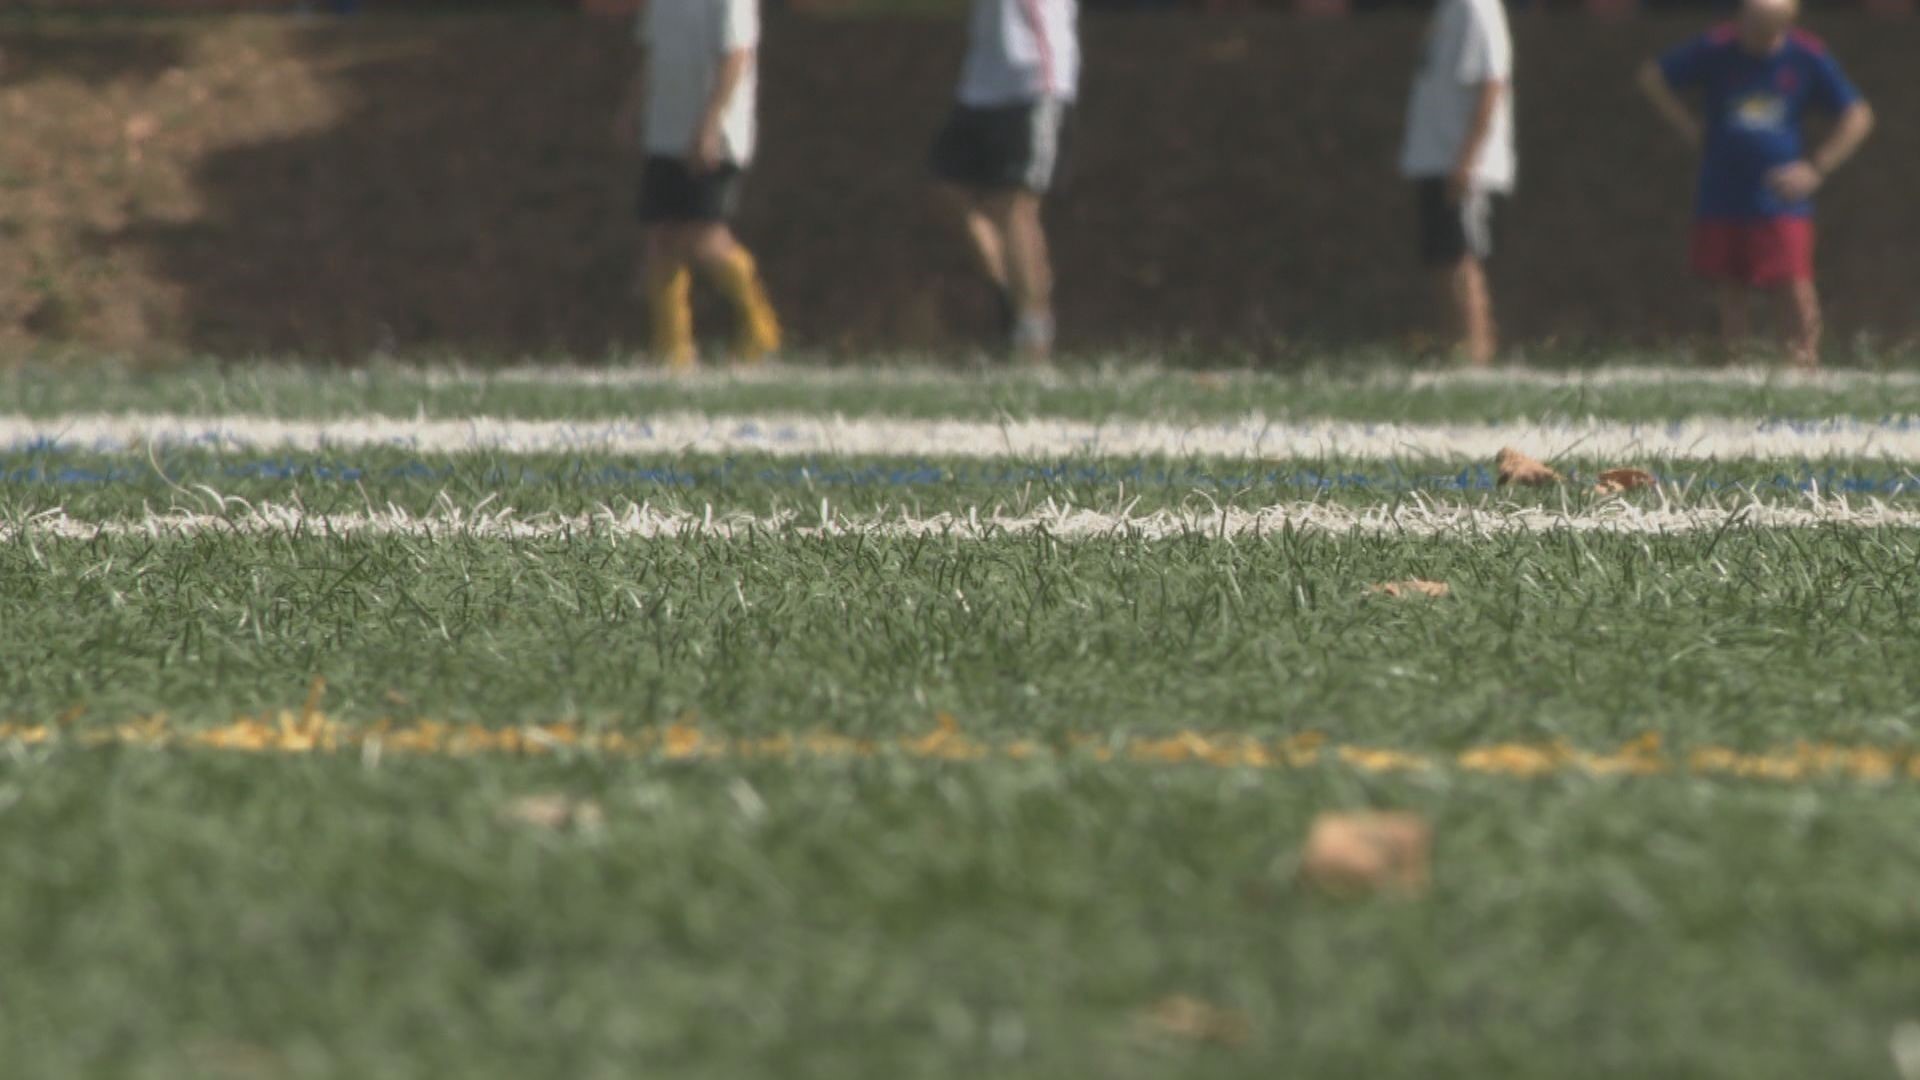 The turf needs to be replaced and it's going to take more than a year. Grant High School sports teams will need to find a new spot to play and practice until then.